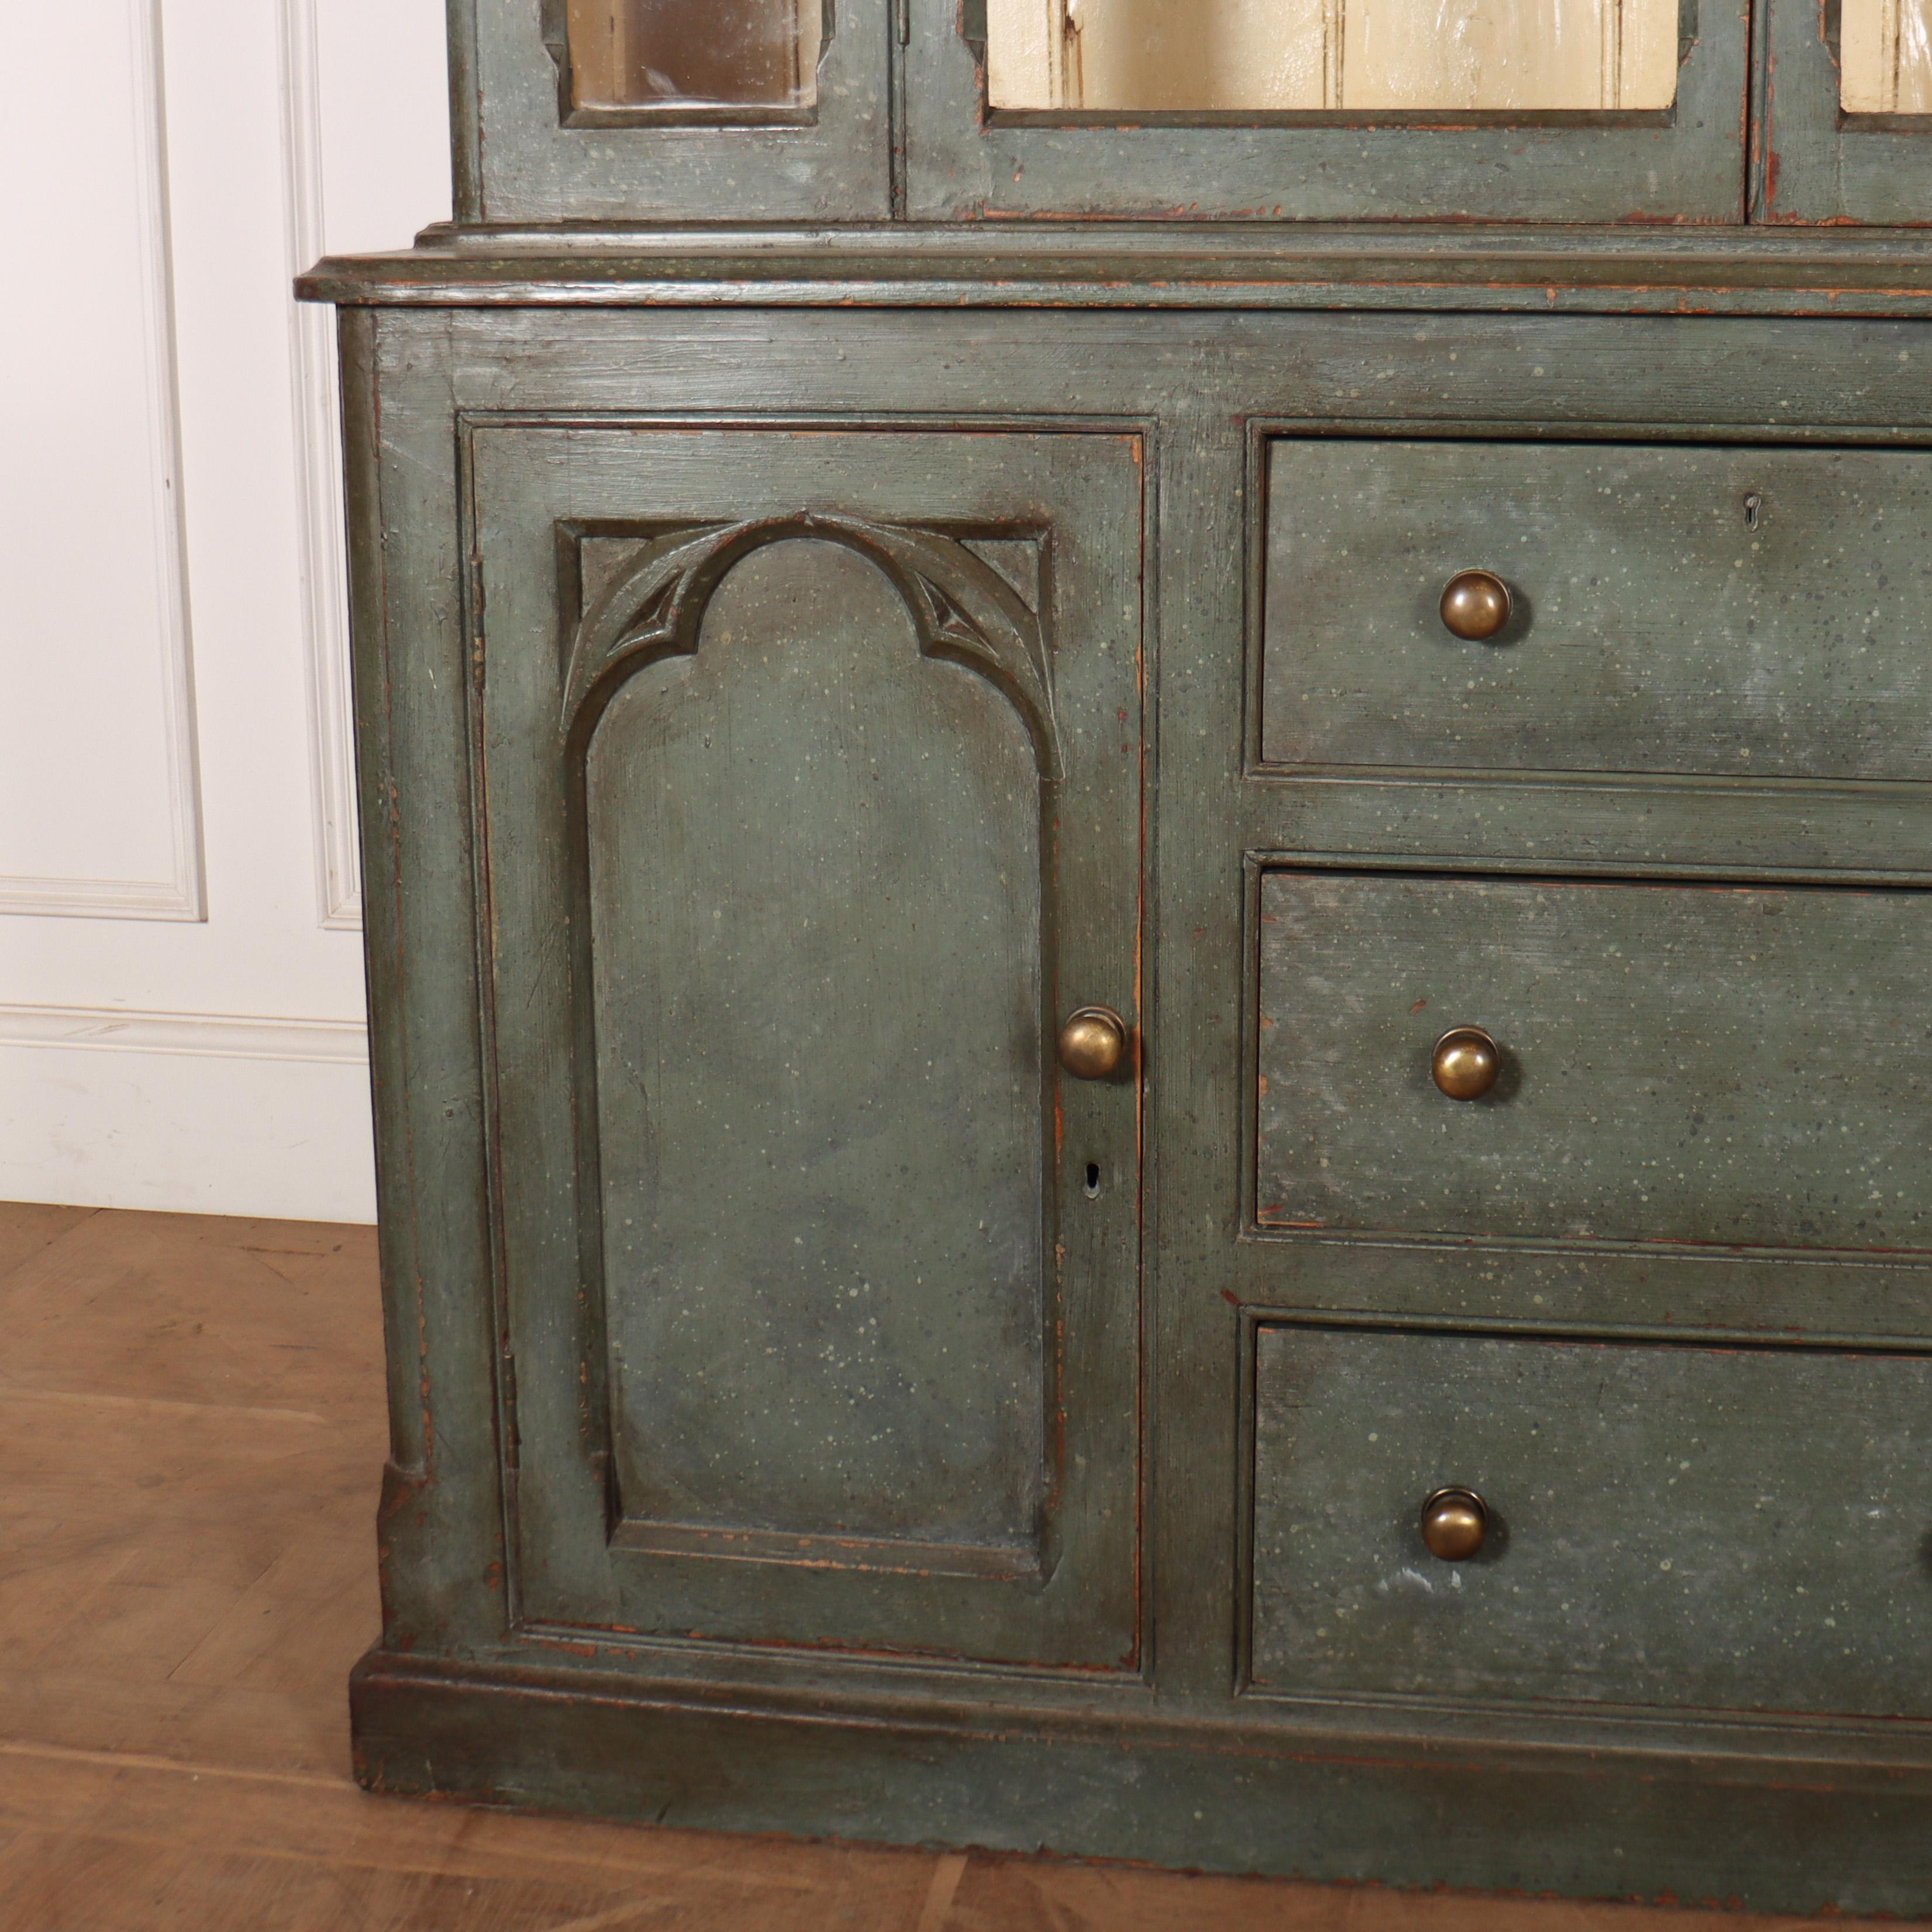 Pretty 19th C West Country gothic glazed dresser. 1850.

Internal shelf depth in top section is 10.5